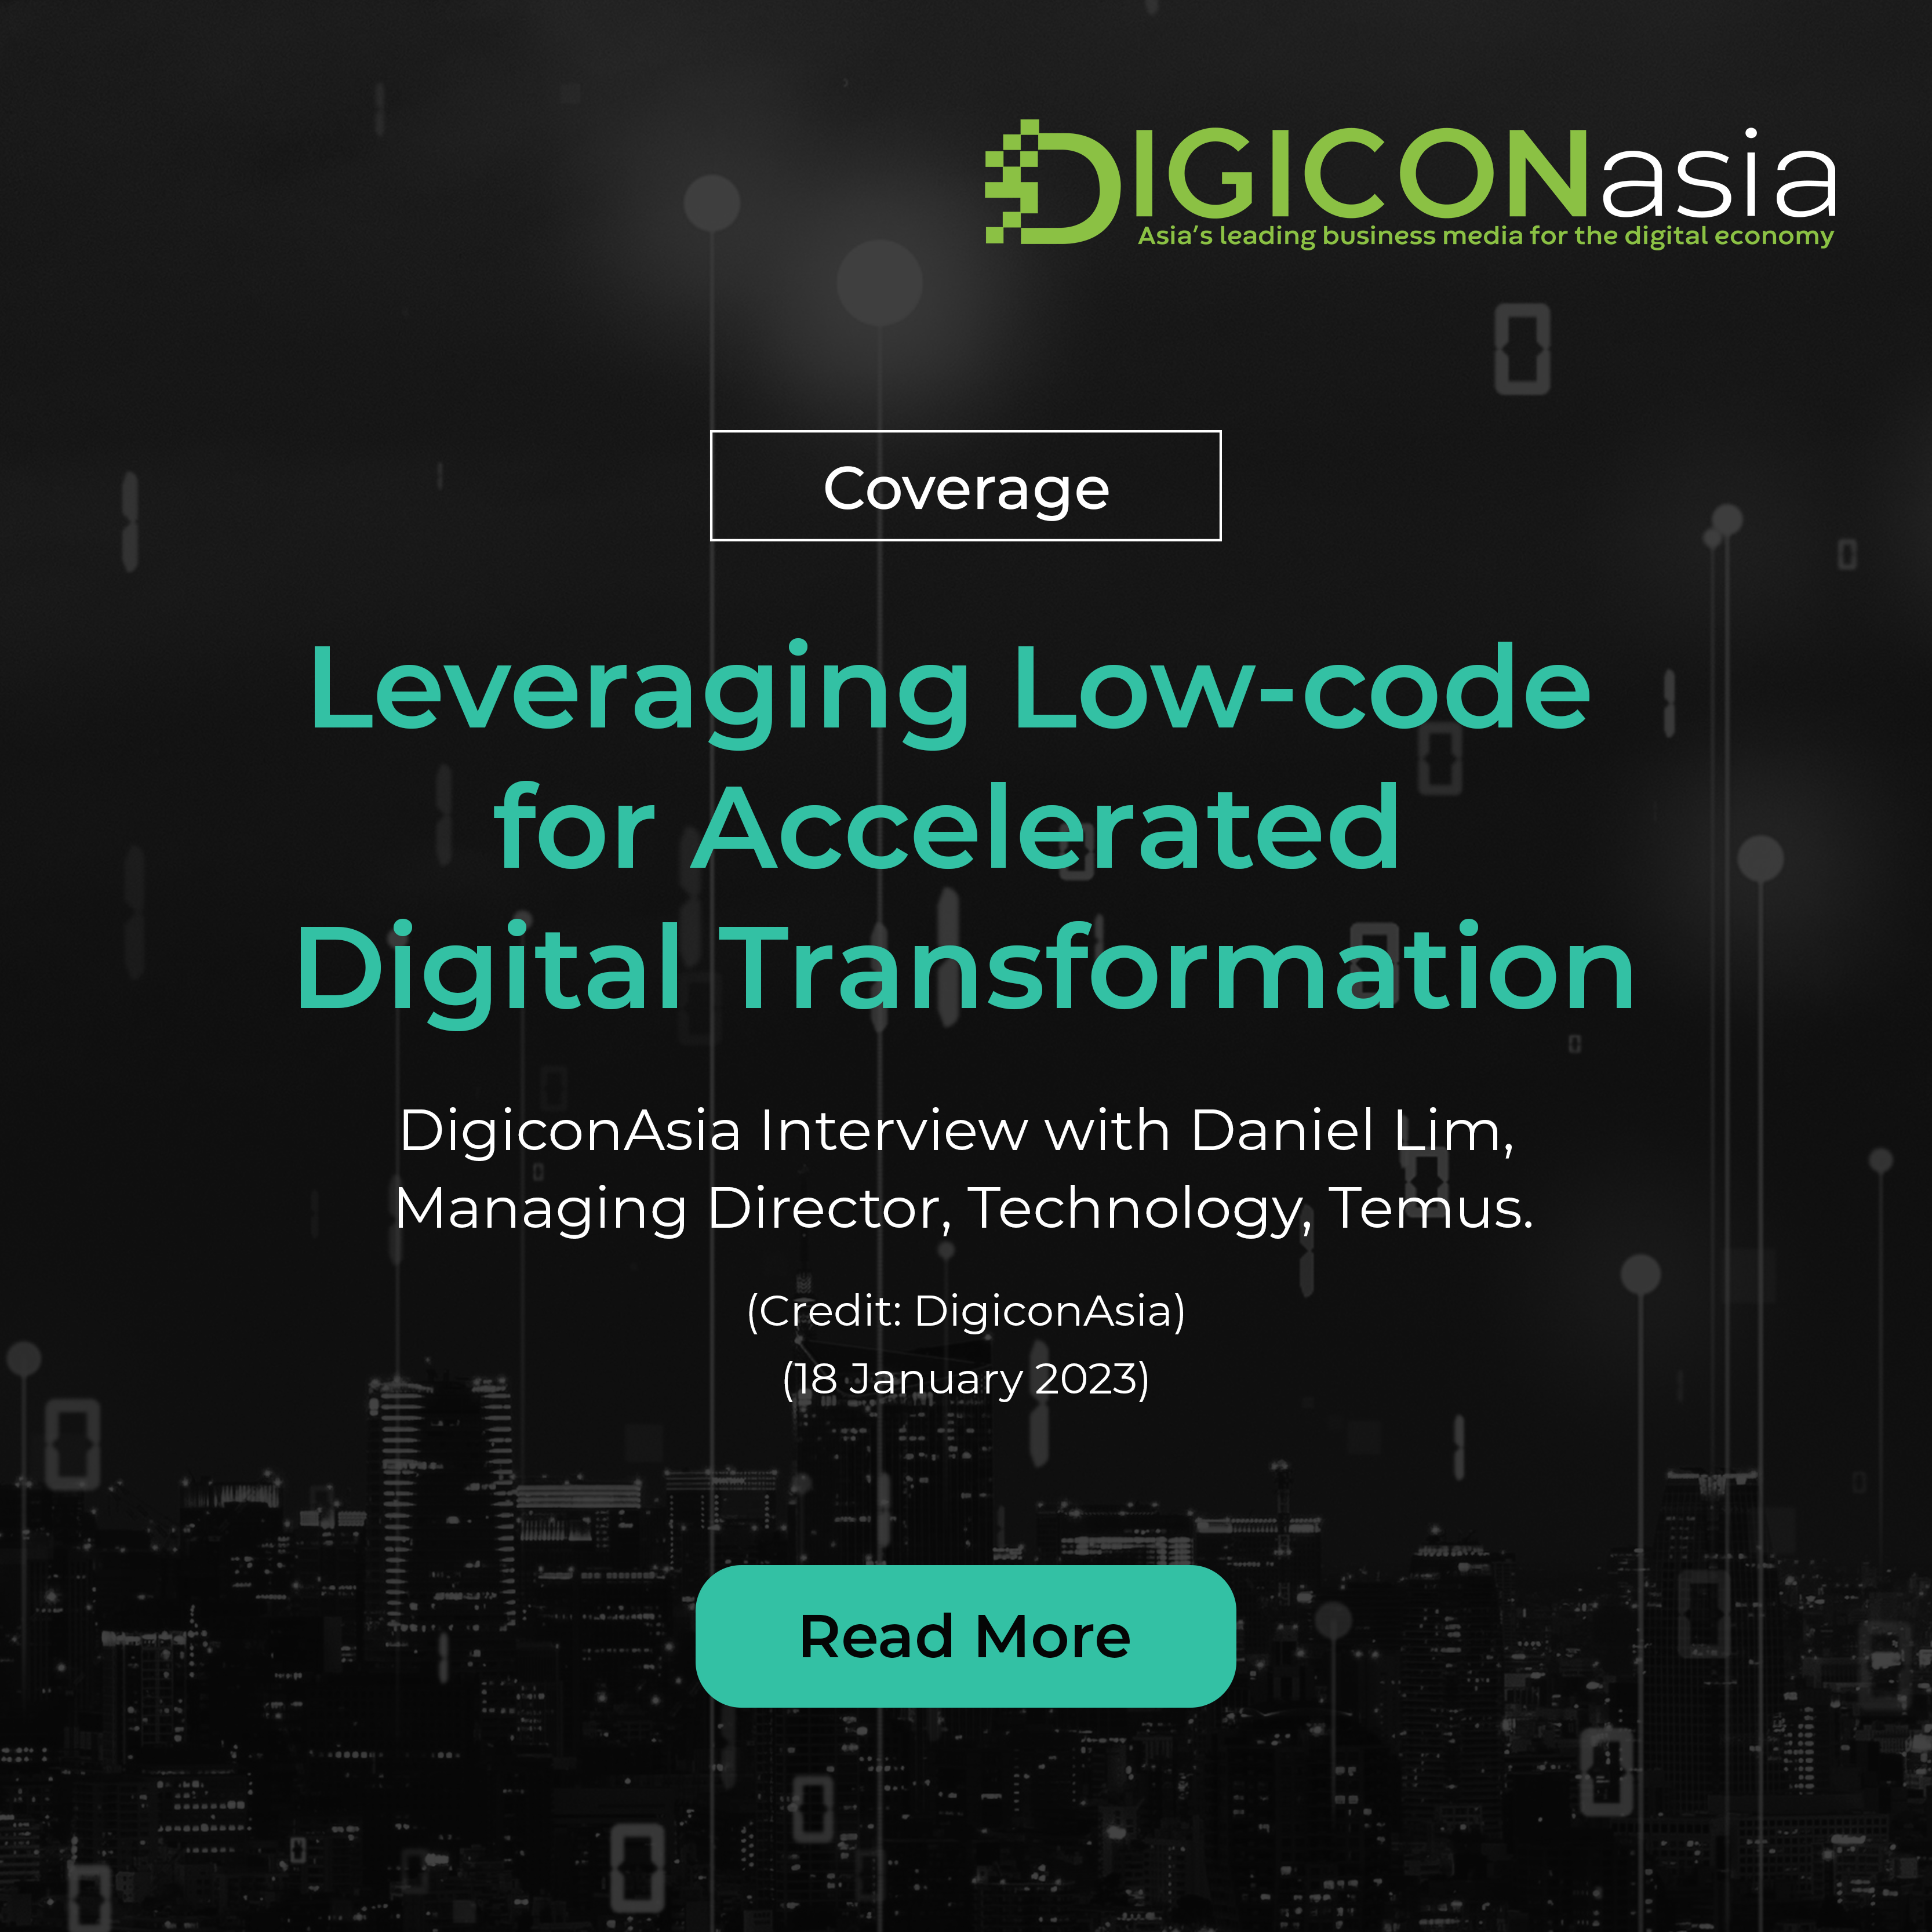 Coverage: Leveraging low code for accelerated digital transformation